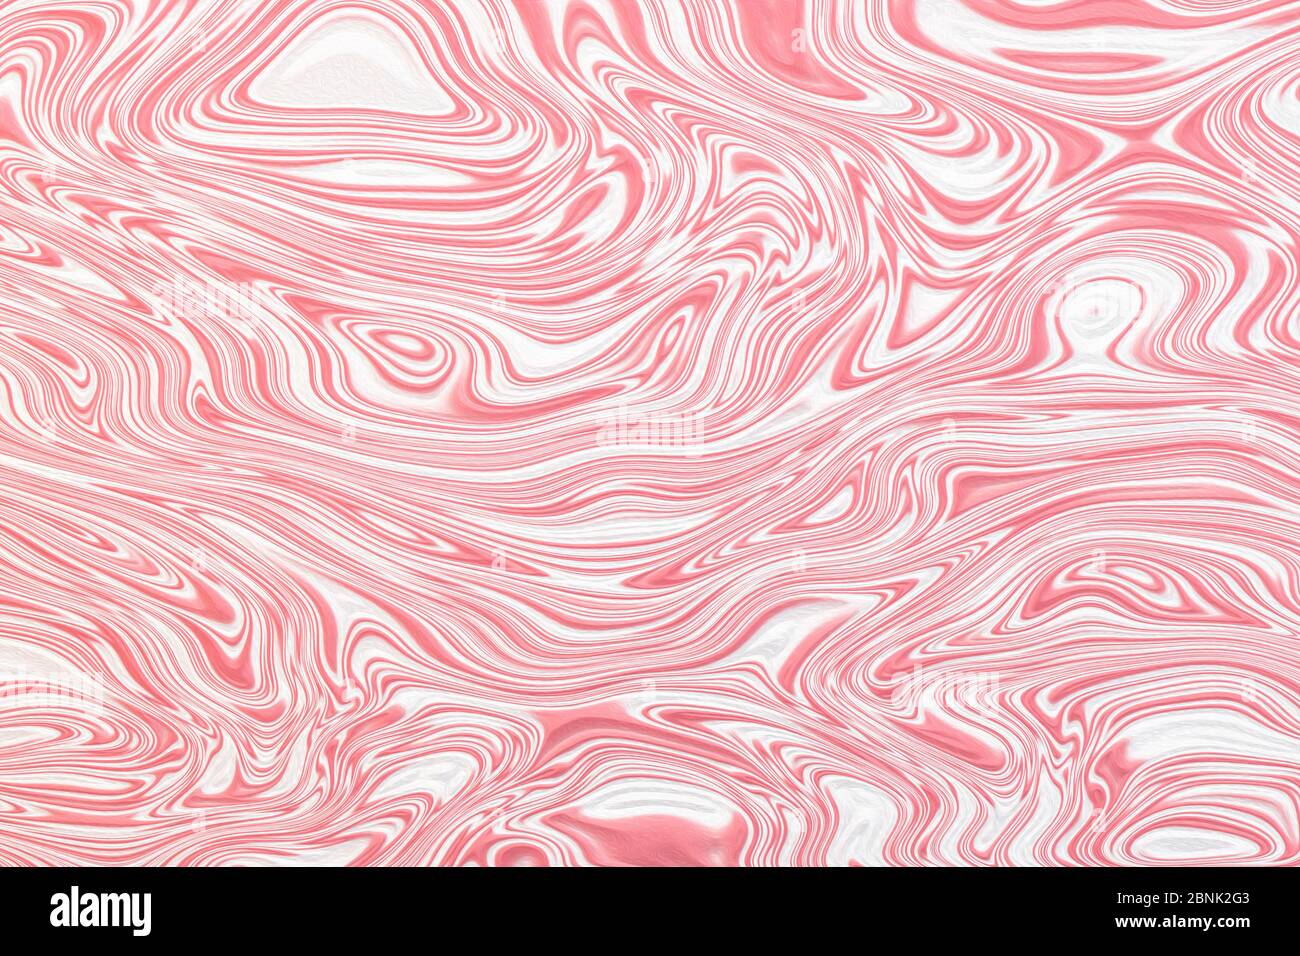 Acrylic pouring white pink paint marble paint texture background for design artwork or decoration Stock Photo